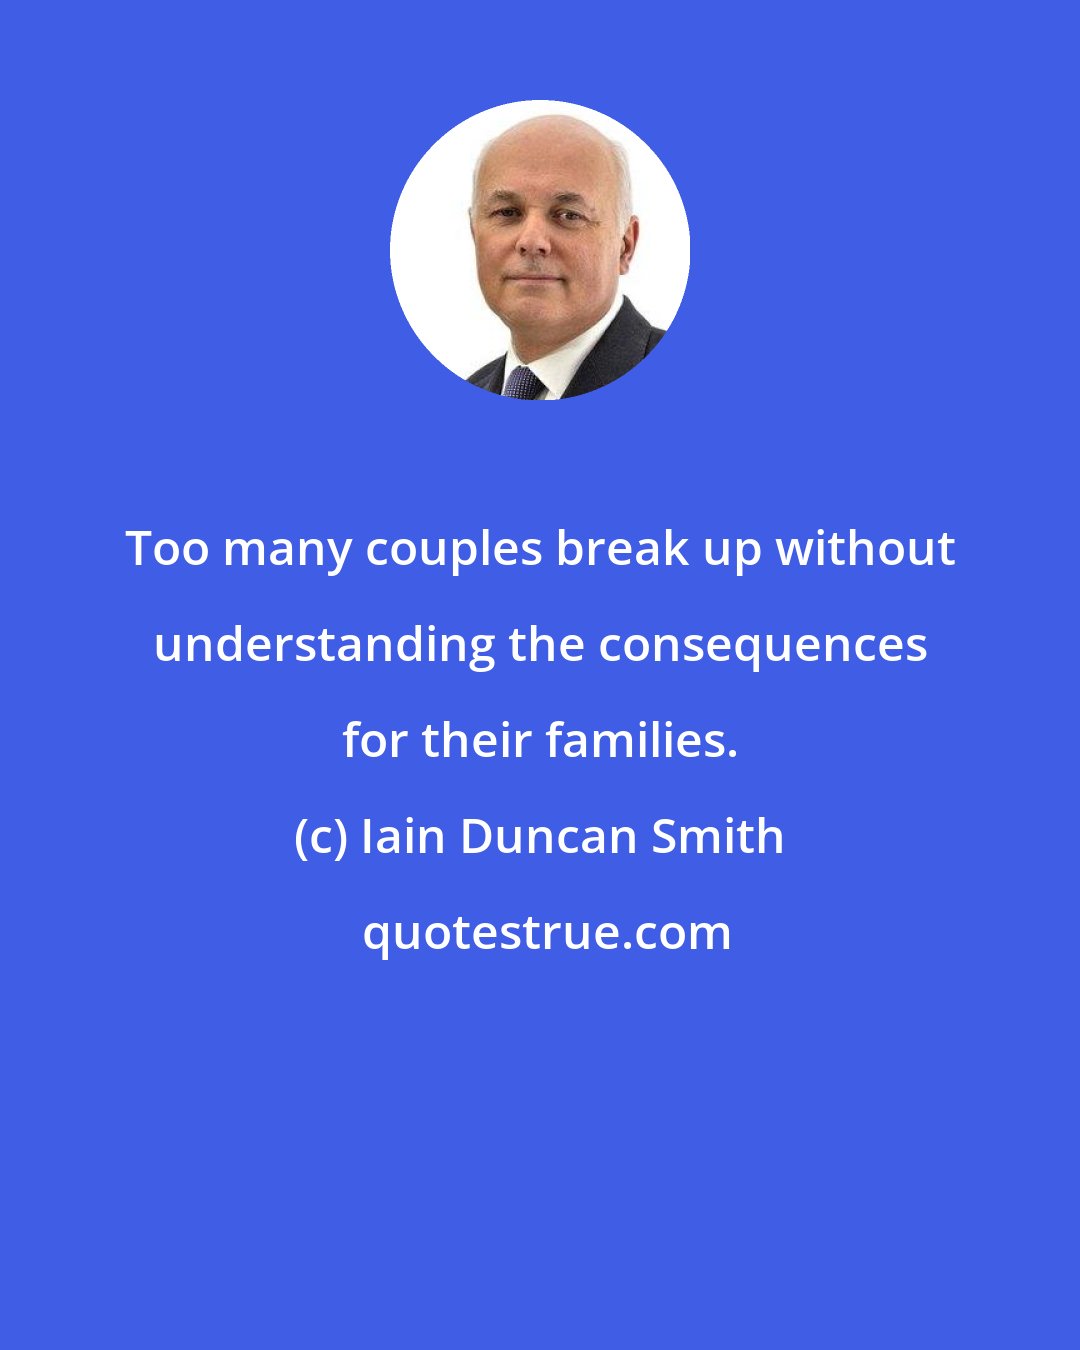 Iain Duncan Smith: Too many couples break up without understanding the consequences for their families.